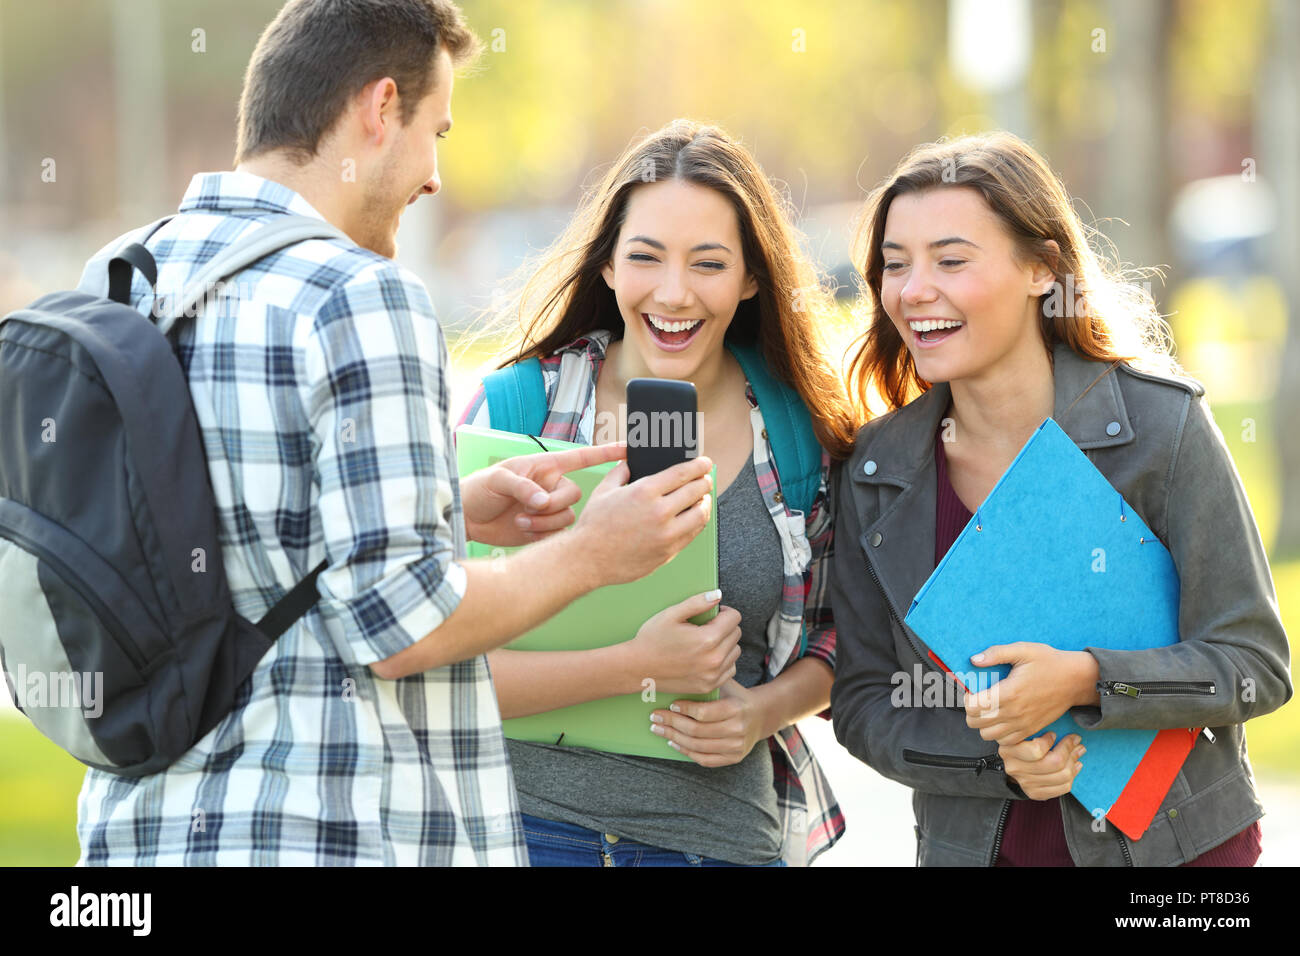 Three happy students sharing smart phone content in a park Stock Photo